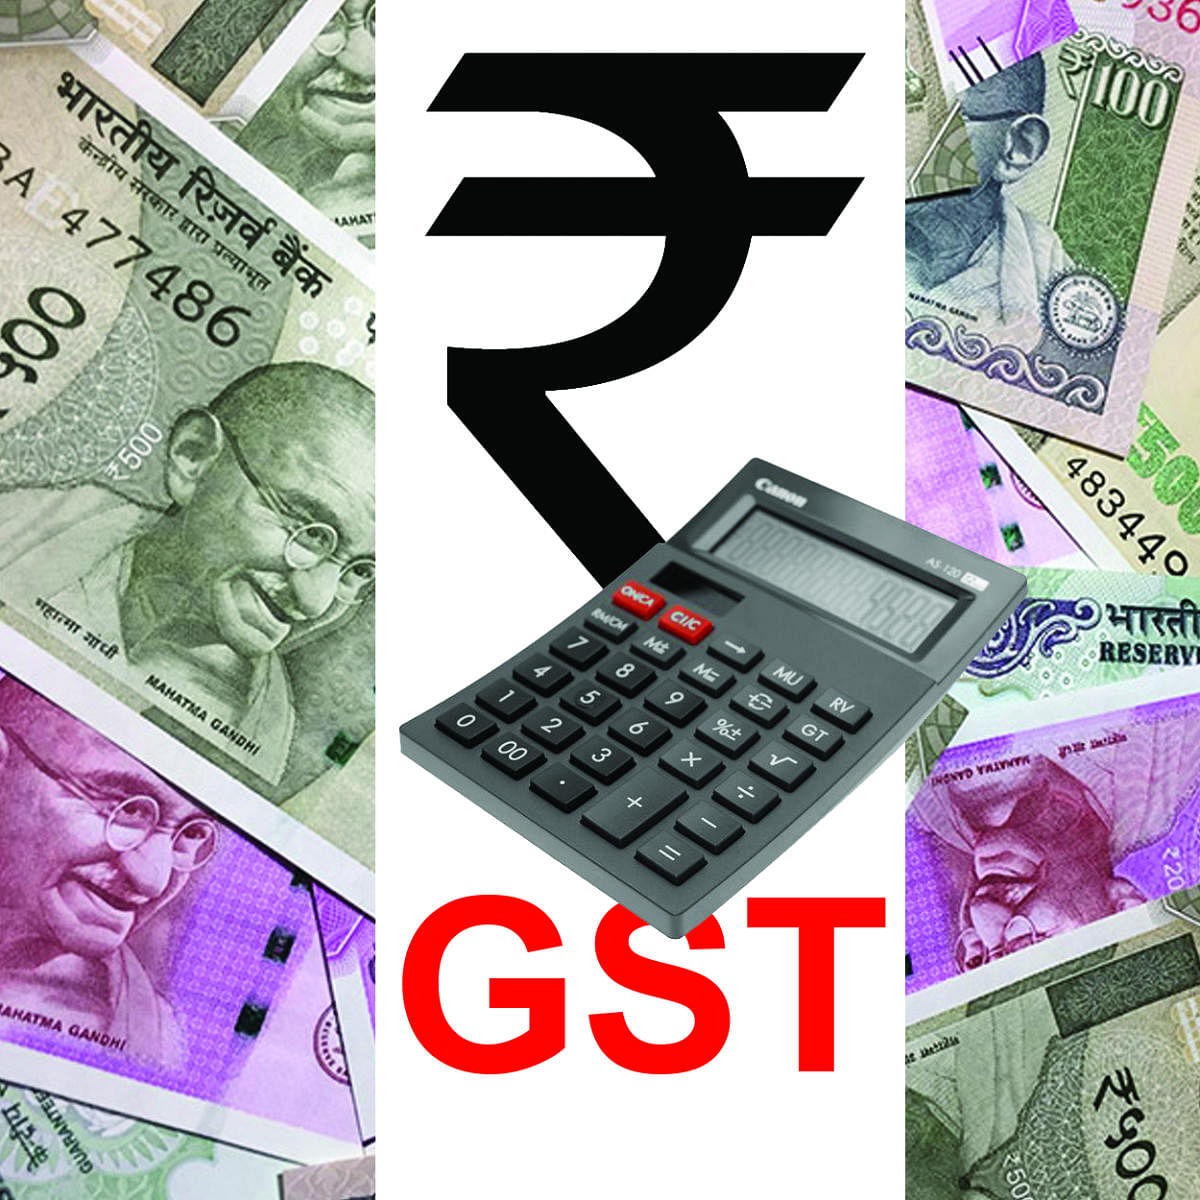 Of the Rs 94,726 crore collected, Central GST (CGST)collection is Rs 16,442 crore, State GST (SGST) is Rs 22,459 crore, Integrated GST (IGST) is Rs 47,936 crore and Cess is Rs 7,888 crore. DH Illustration